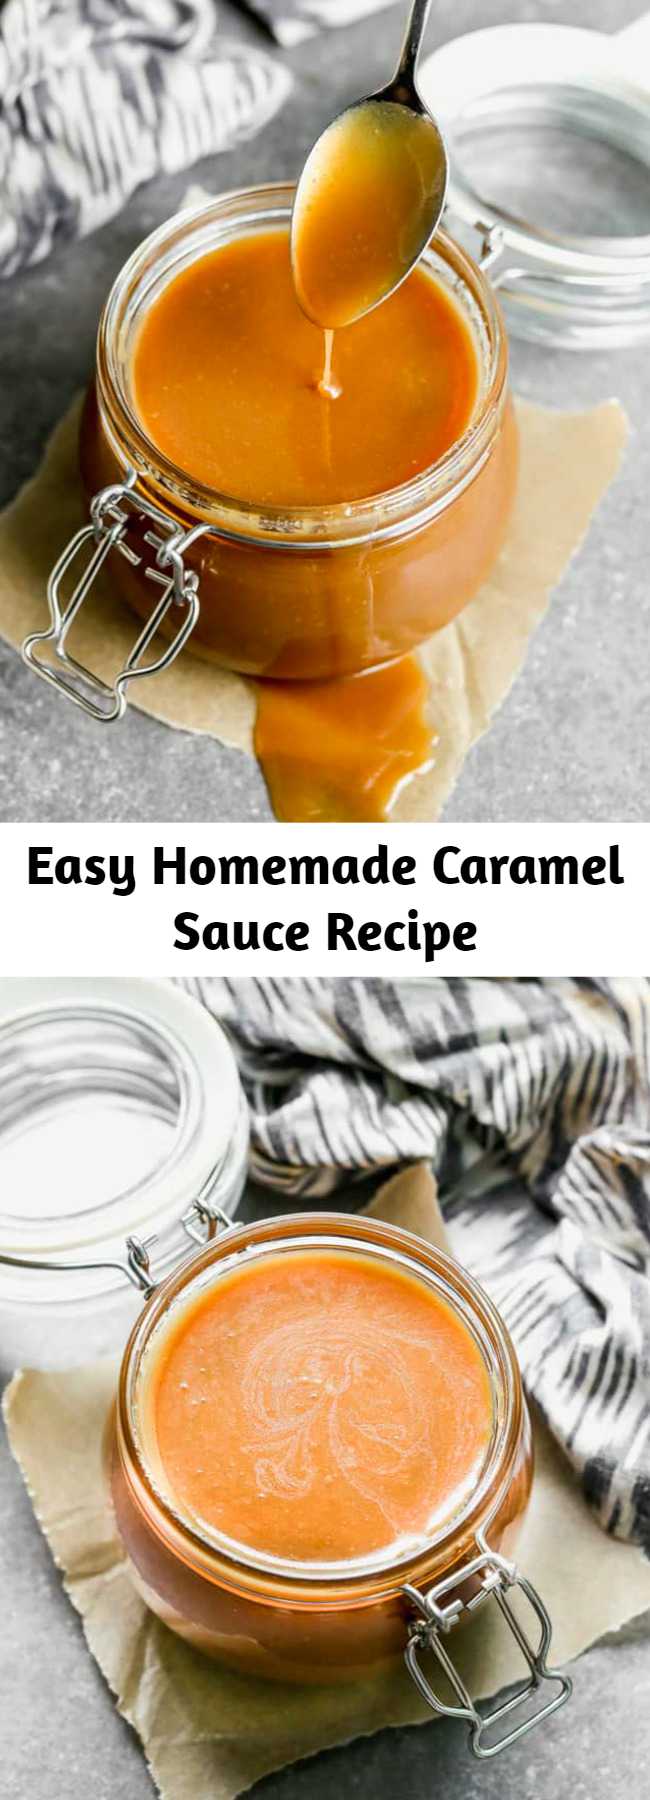 Easy and delicious Homemade Caramel Sauce made with pantry ingredients, that only takes 10 minutes to make.